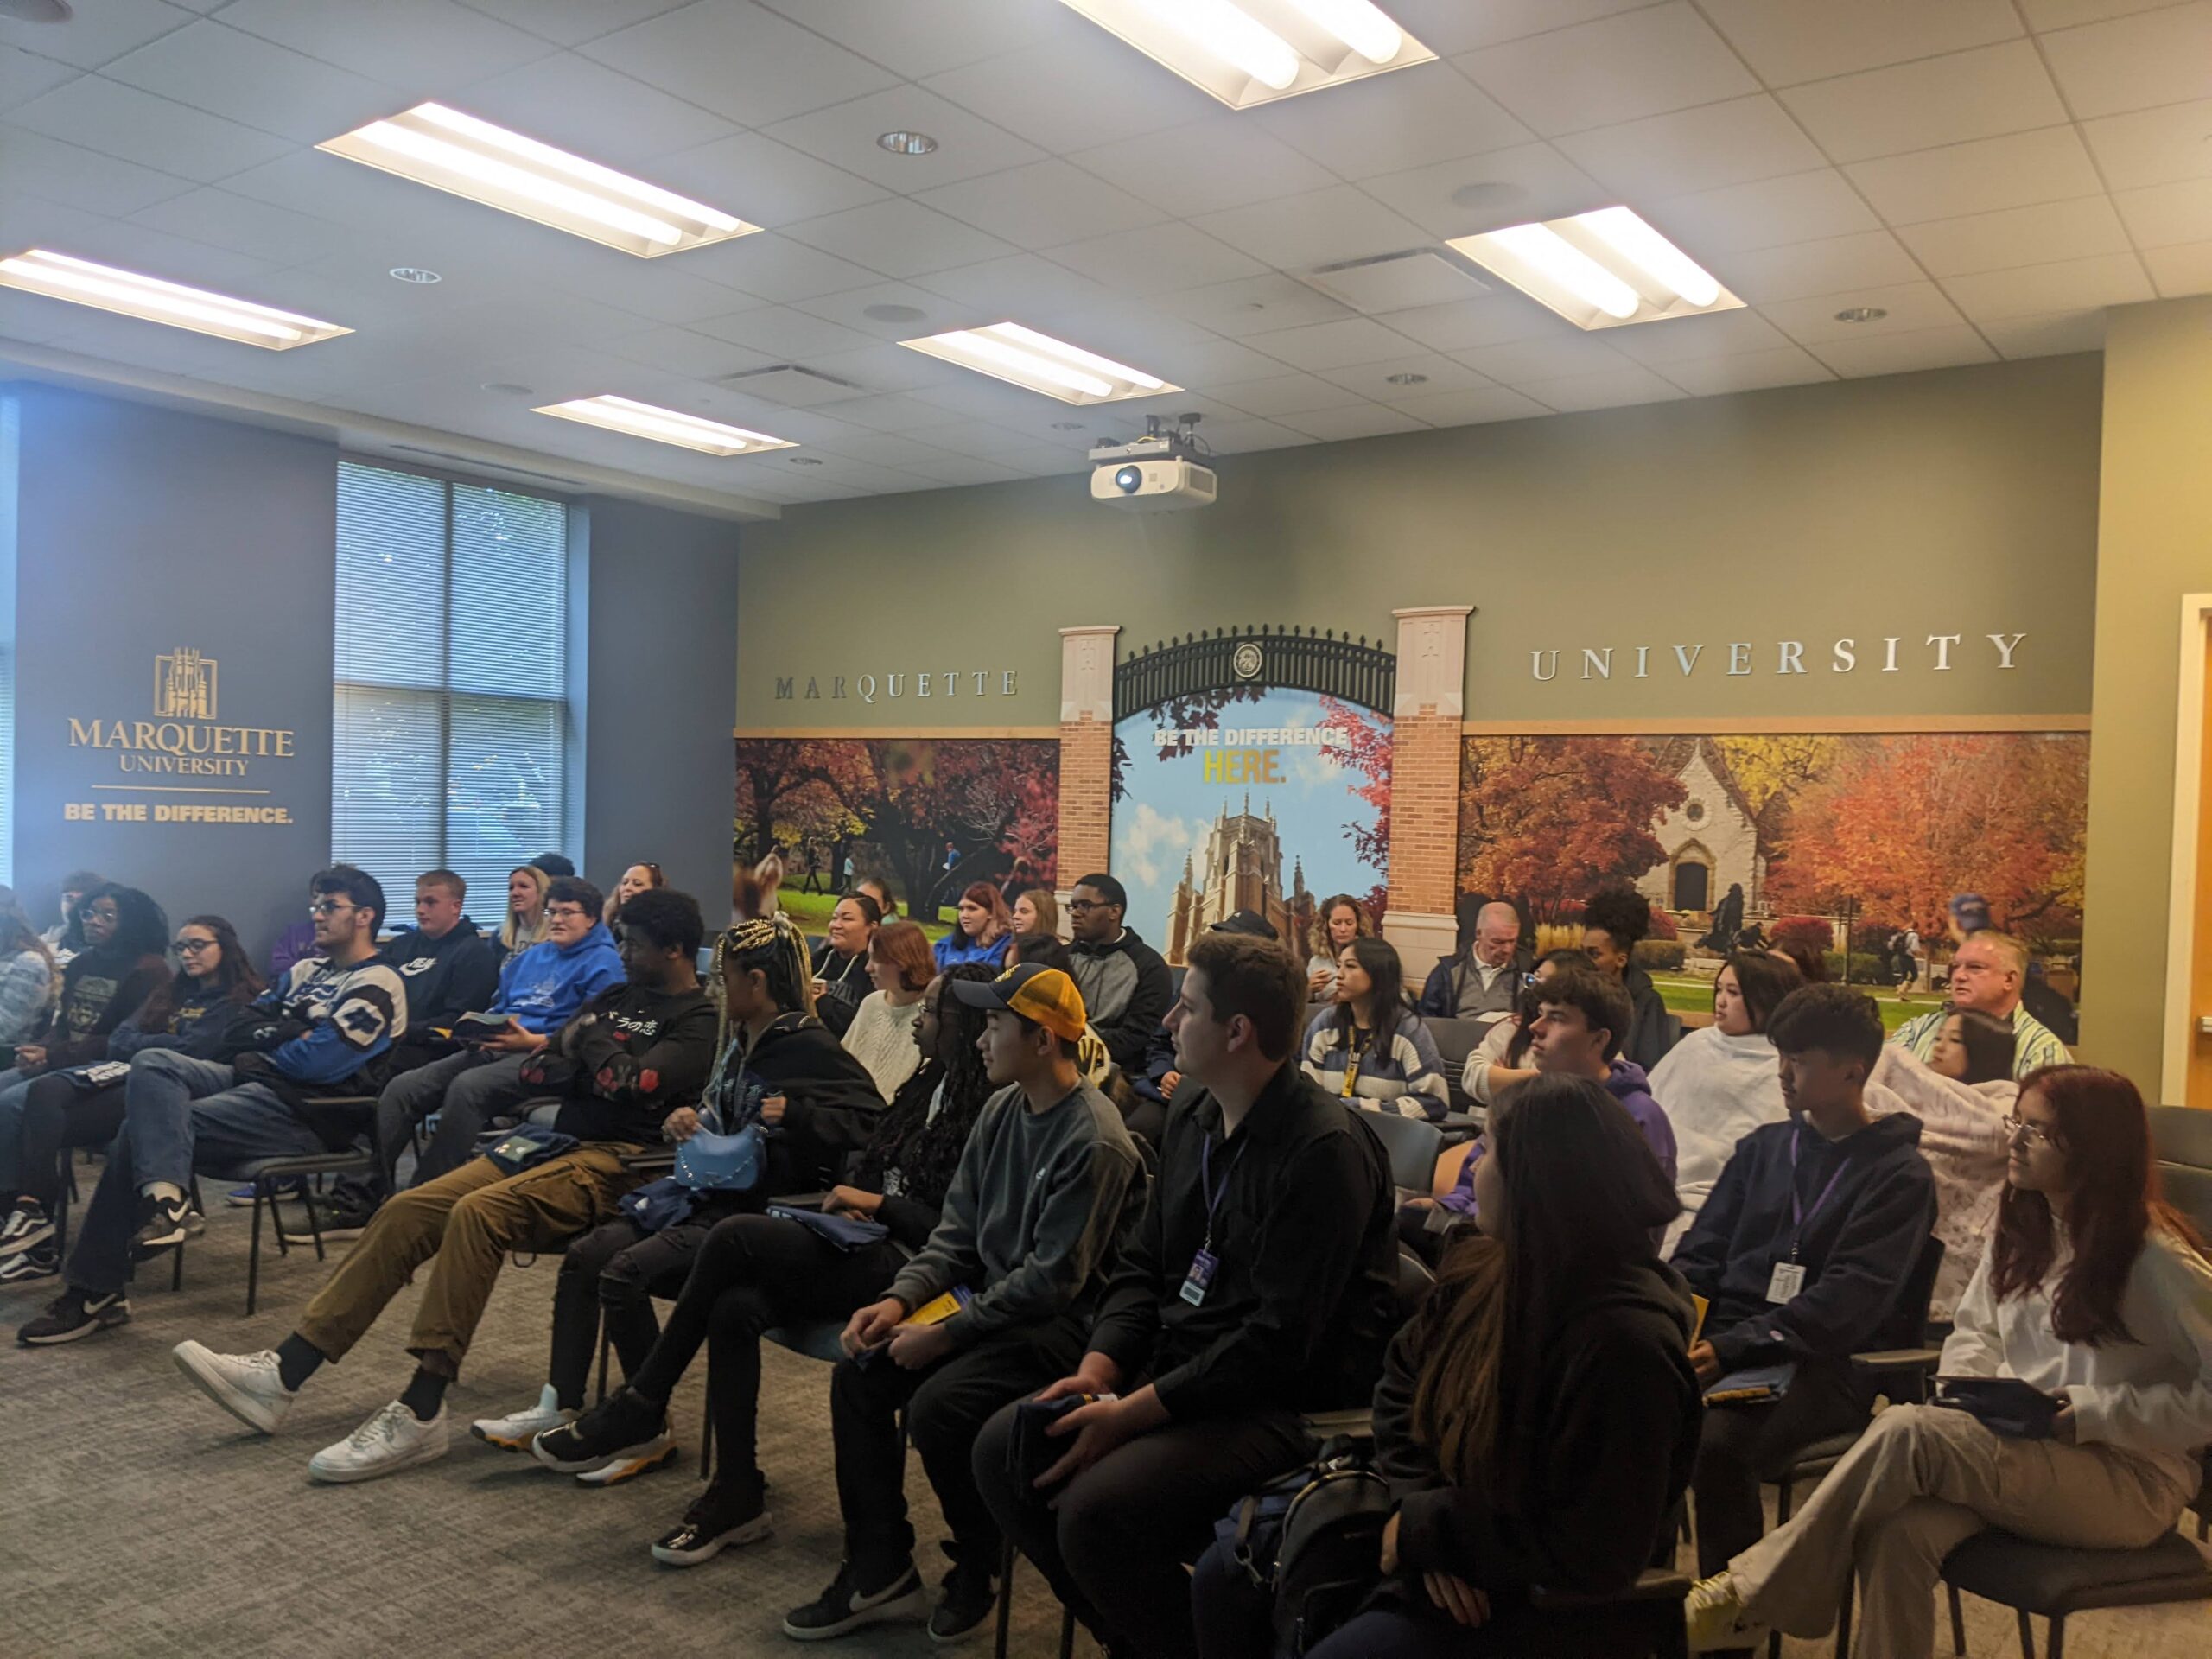 Students listening to presentation at Marquette University tour.